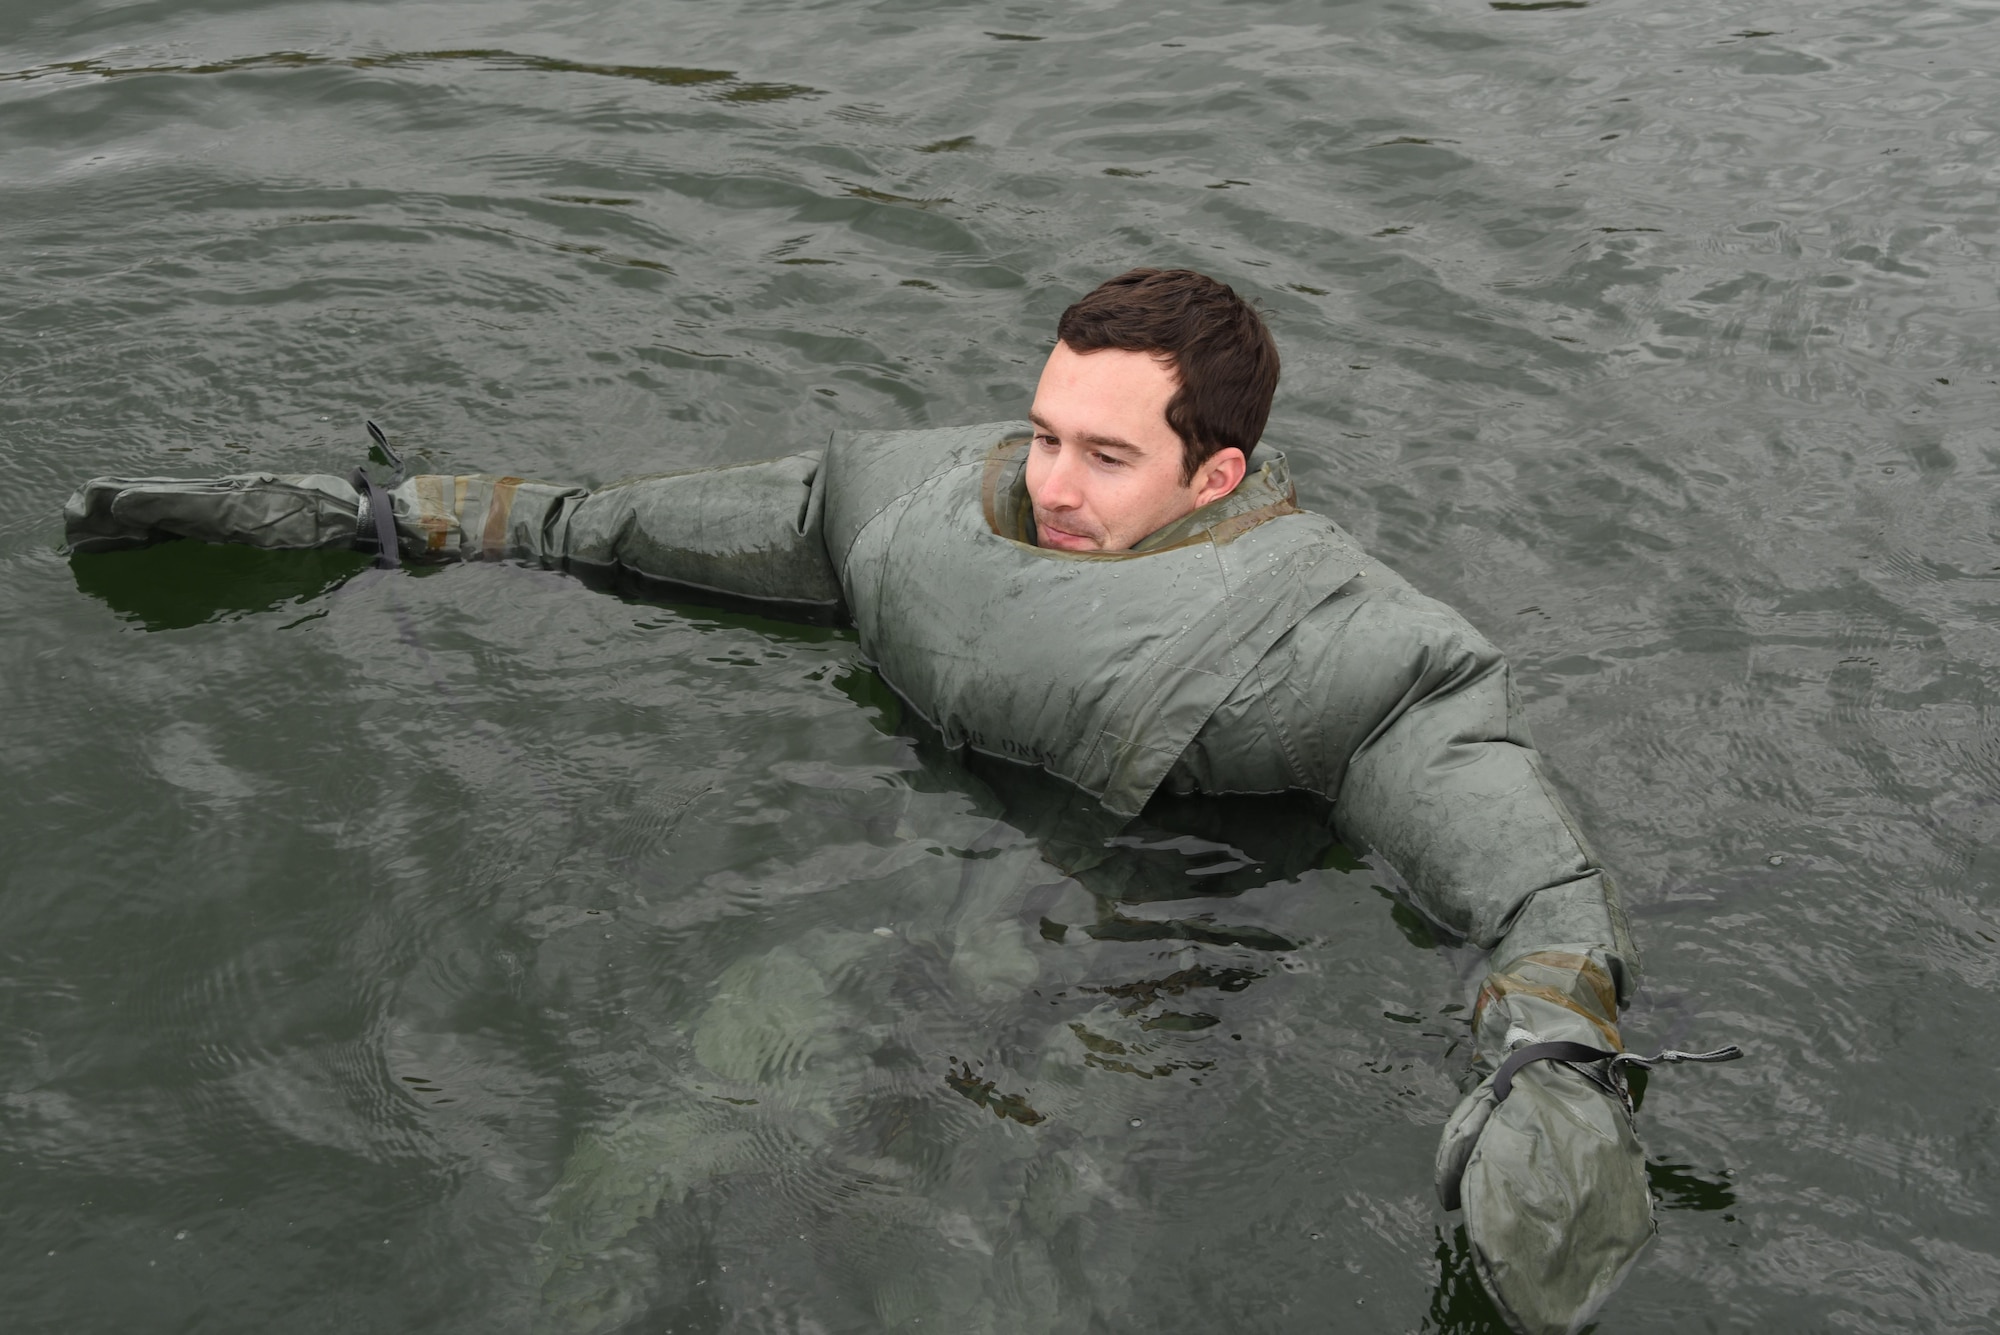 1LT Kevin Irwin, a KC-135 Stratotanker Pilot assigned to the 161st Air Refueling Wing, jumps into the water wearing a CWU-16/P anti-exposure suit during water survival training at Lake Pleasant aquatic center, Ariz., May 7, 2017.  The anti-exposure suit is used to protect aircrew that may need to evacuate the aircraft into cooler water temperatures. (U.S. Air Force photo by Tech. Sgt. Michael Matkin)